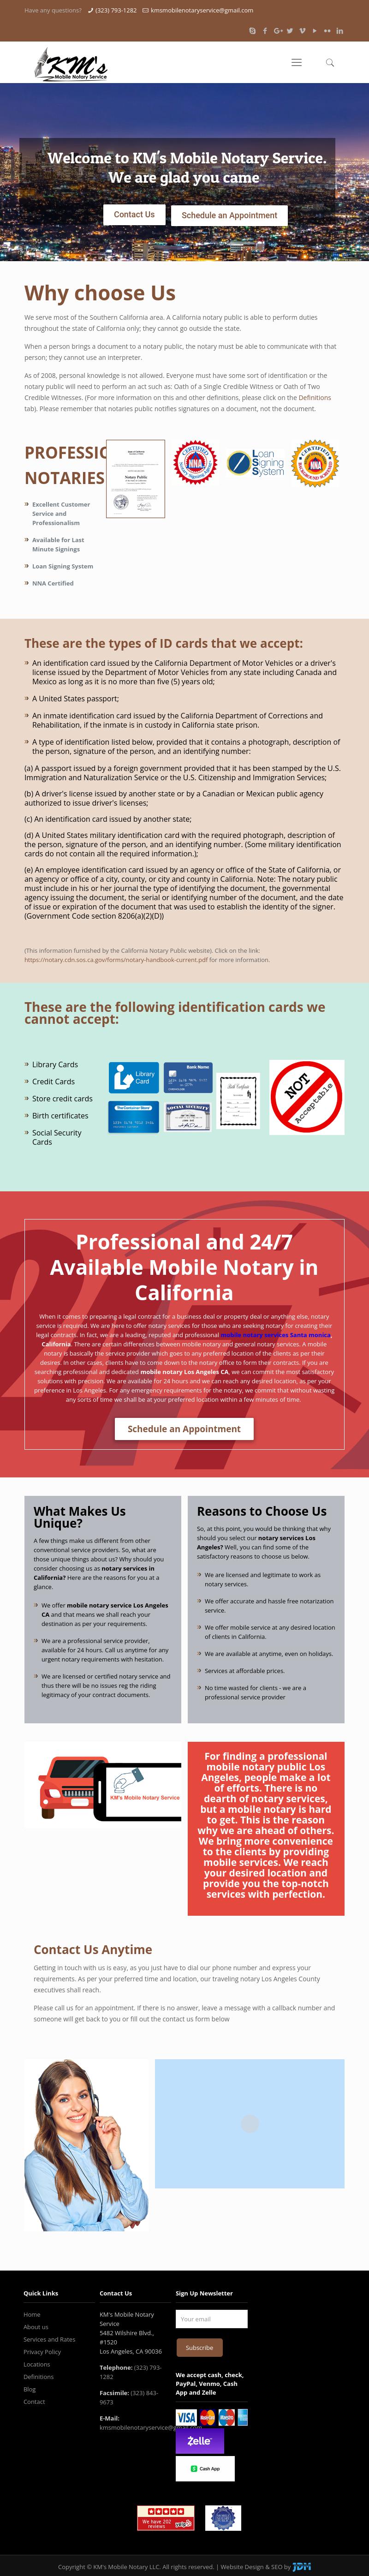  KM's Mobile Notary Services - Los Angeles CA Lawyers